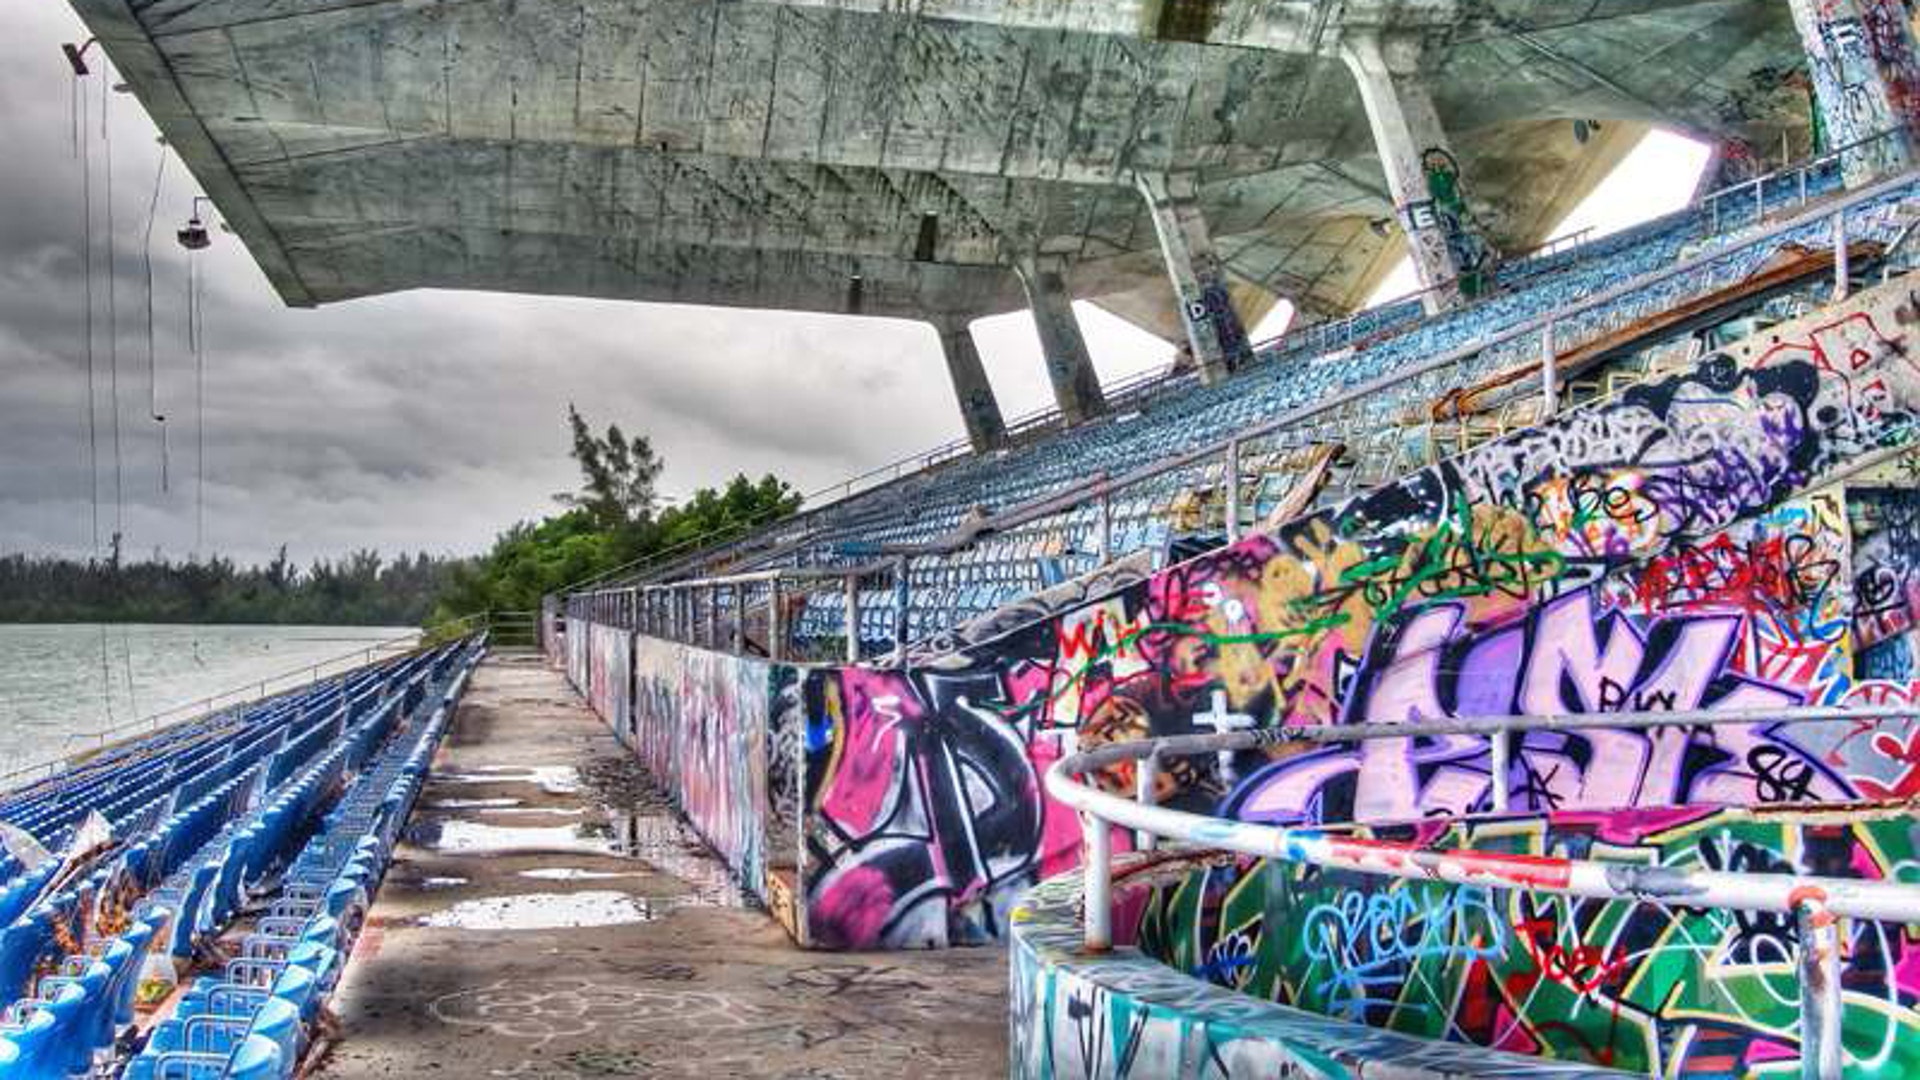 Restore Miami Marine Stadium - STREET ART AT MIAMI MARINE STADIUM After its  closing in 1992, the Marine Stadium became a very popular place for  graffiti. In fact, street artists, through their